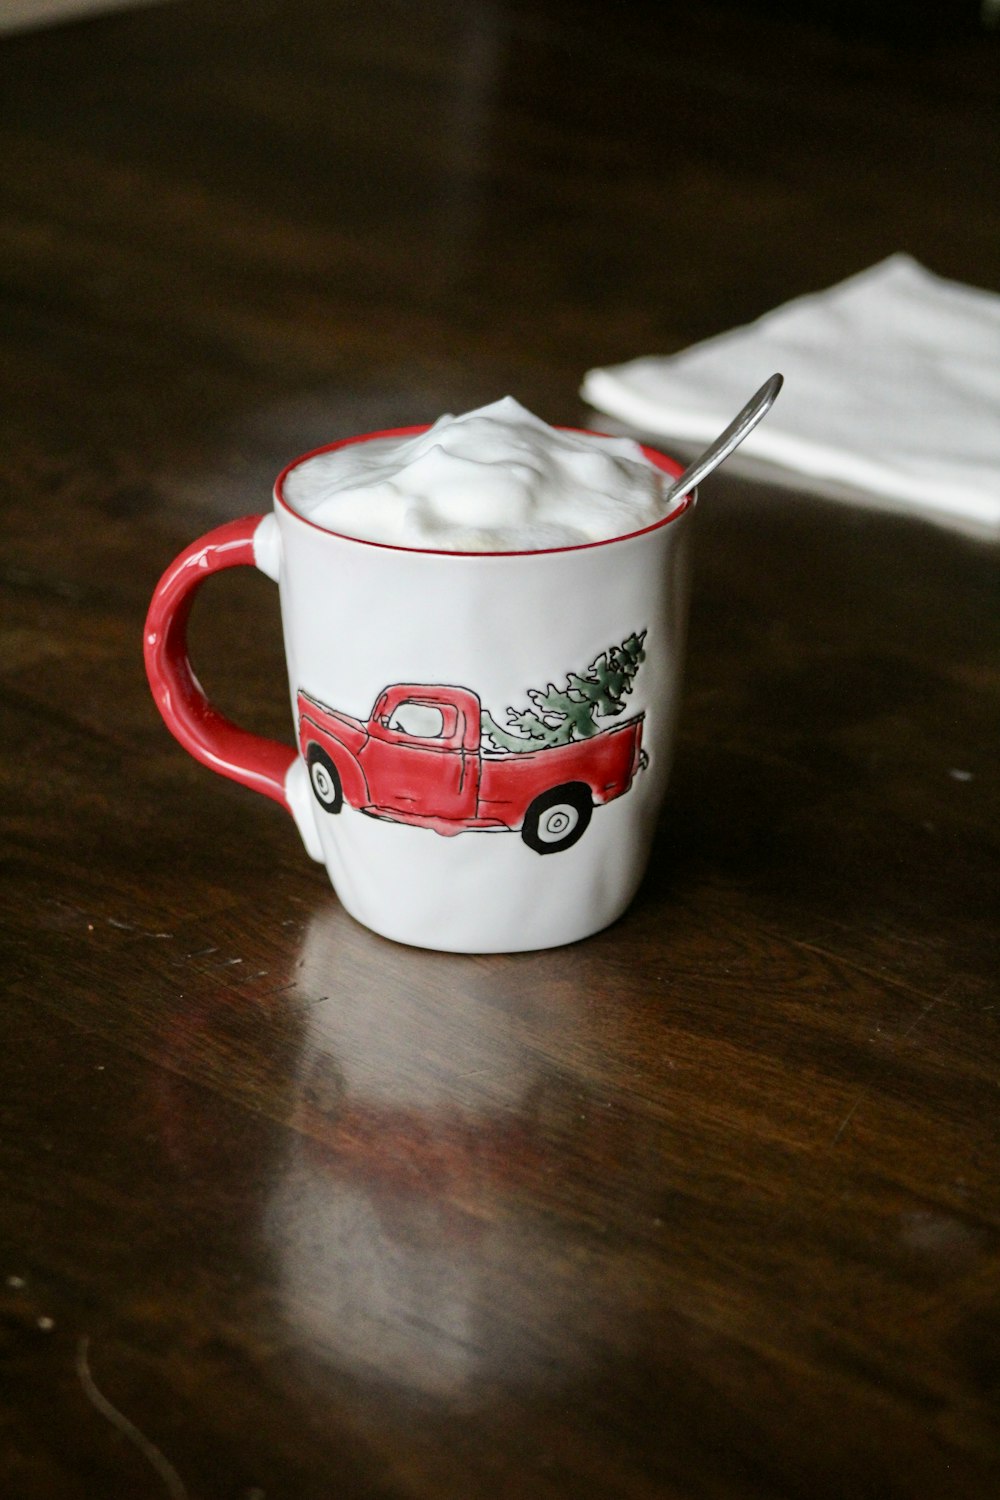 white and red ceramic mug with spoon